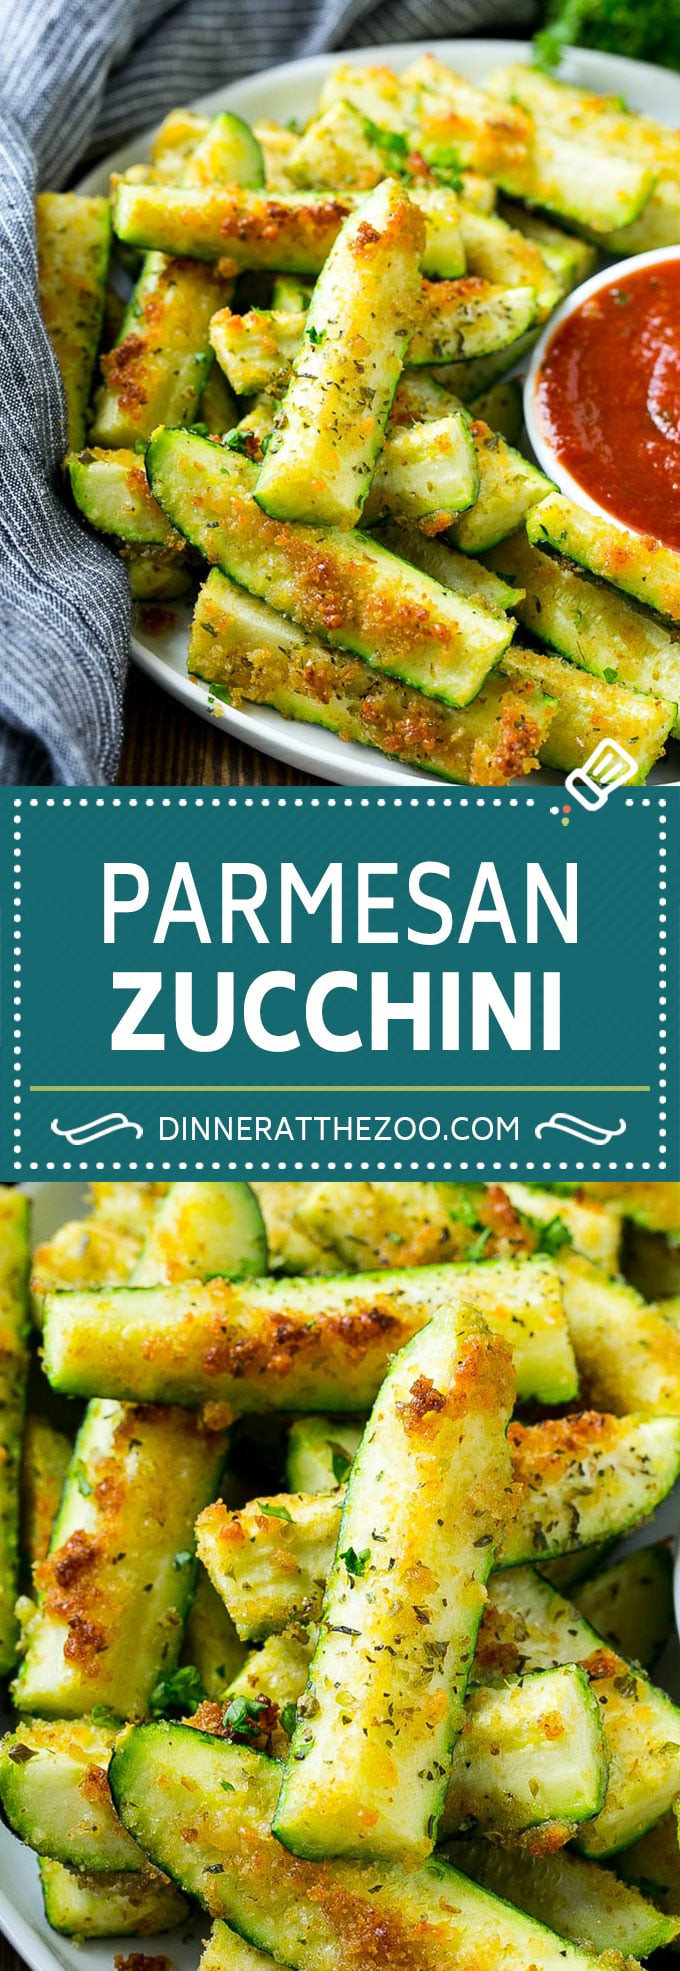 Zucchini Dinner Recipes
 Parmesan Zucchini Dinner at the Zoo